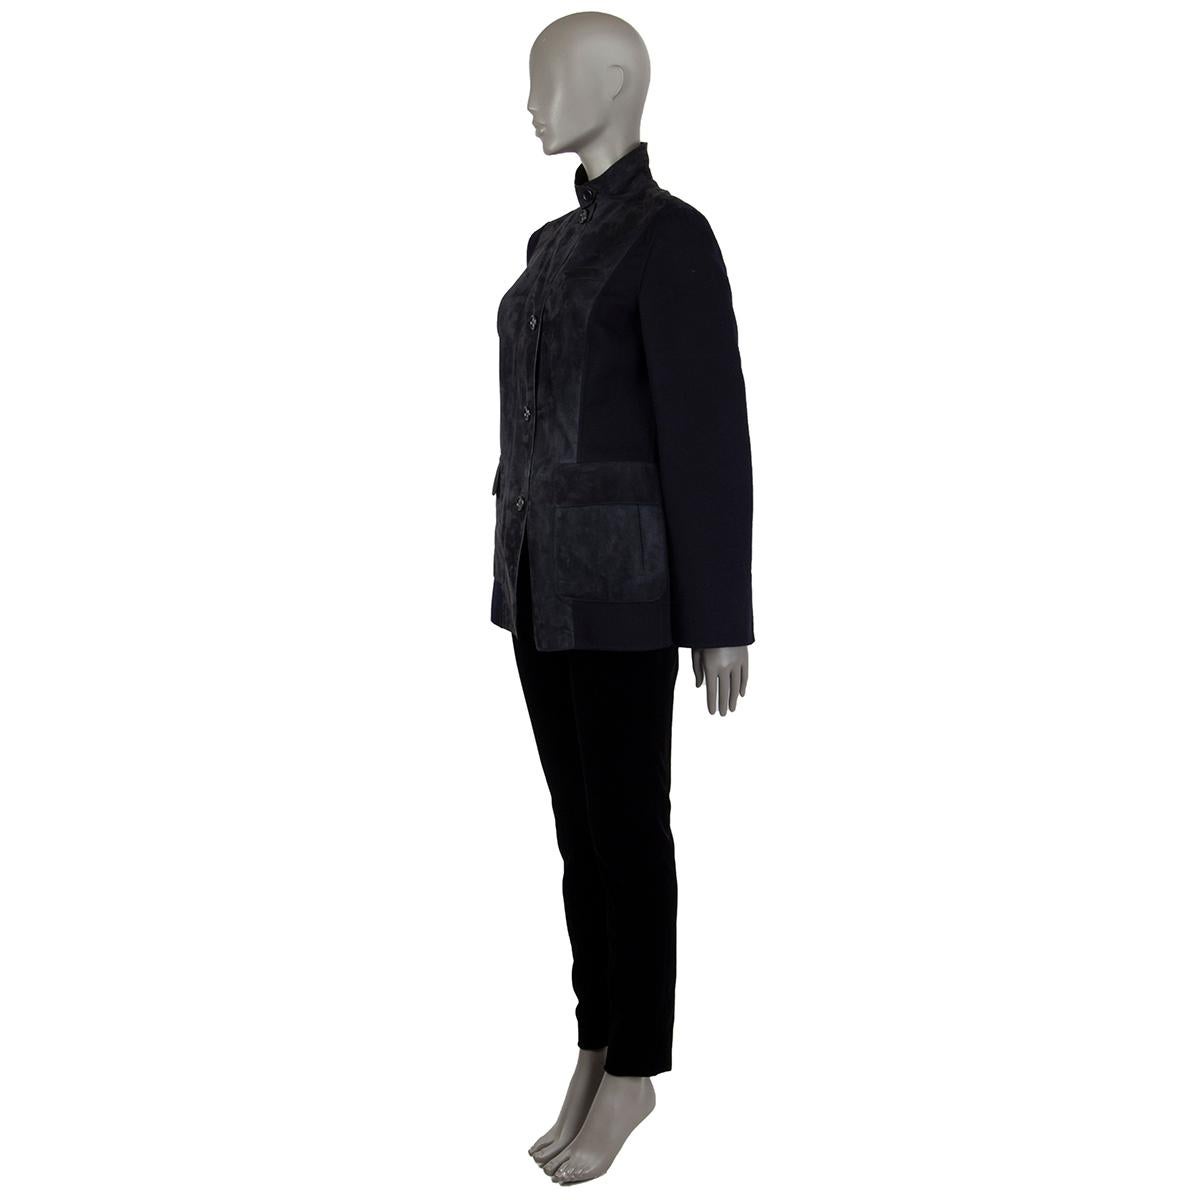 Loro Piana band-collar jacket in midnight blue kidskin (100%) and cahsmere (100%). With two flap pockets on the sides, flap on the back, and slit at the sleeves. Closes with concealed two-way zipper and brand buttons in midnight blue plastic on the